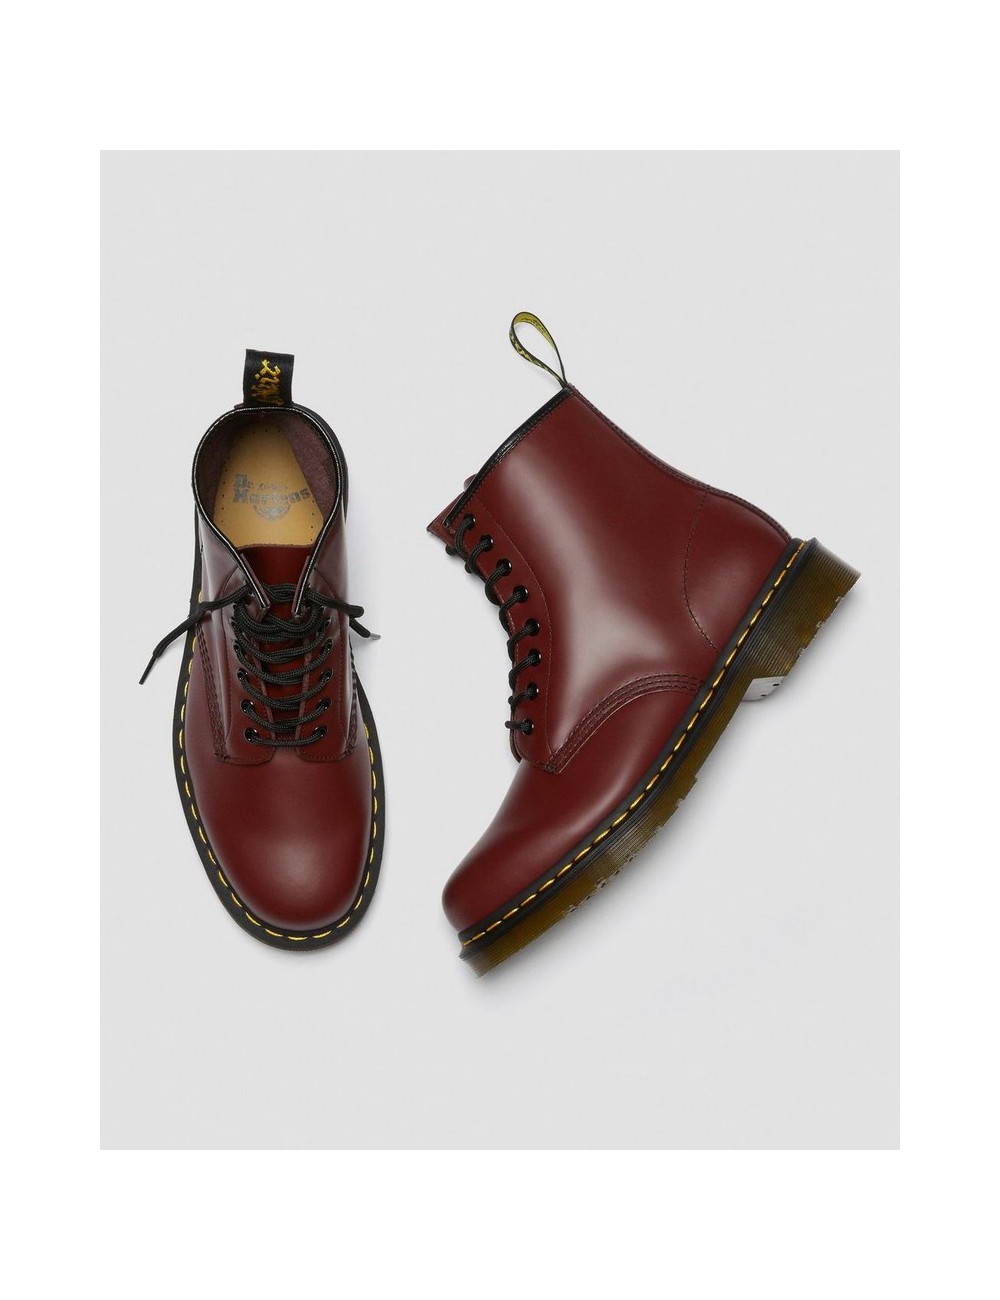 DR MARTENS 1460 SMOOTH SHERRY RED BOOTS